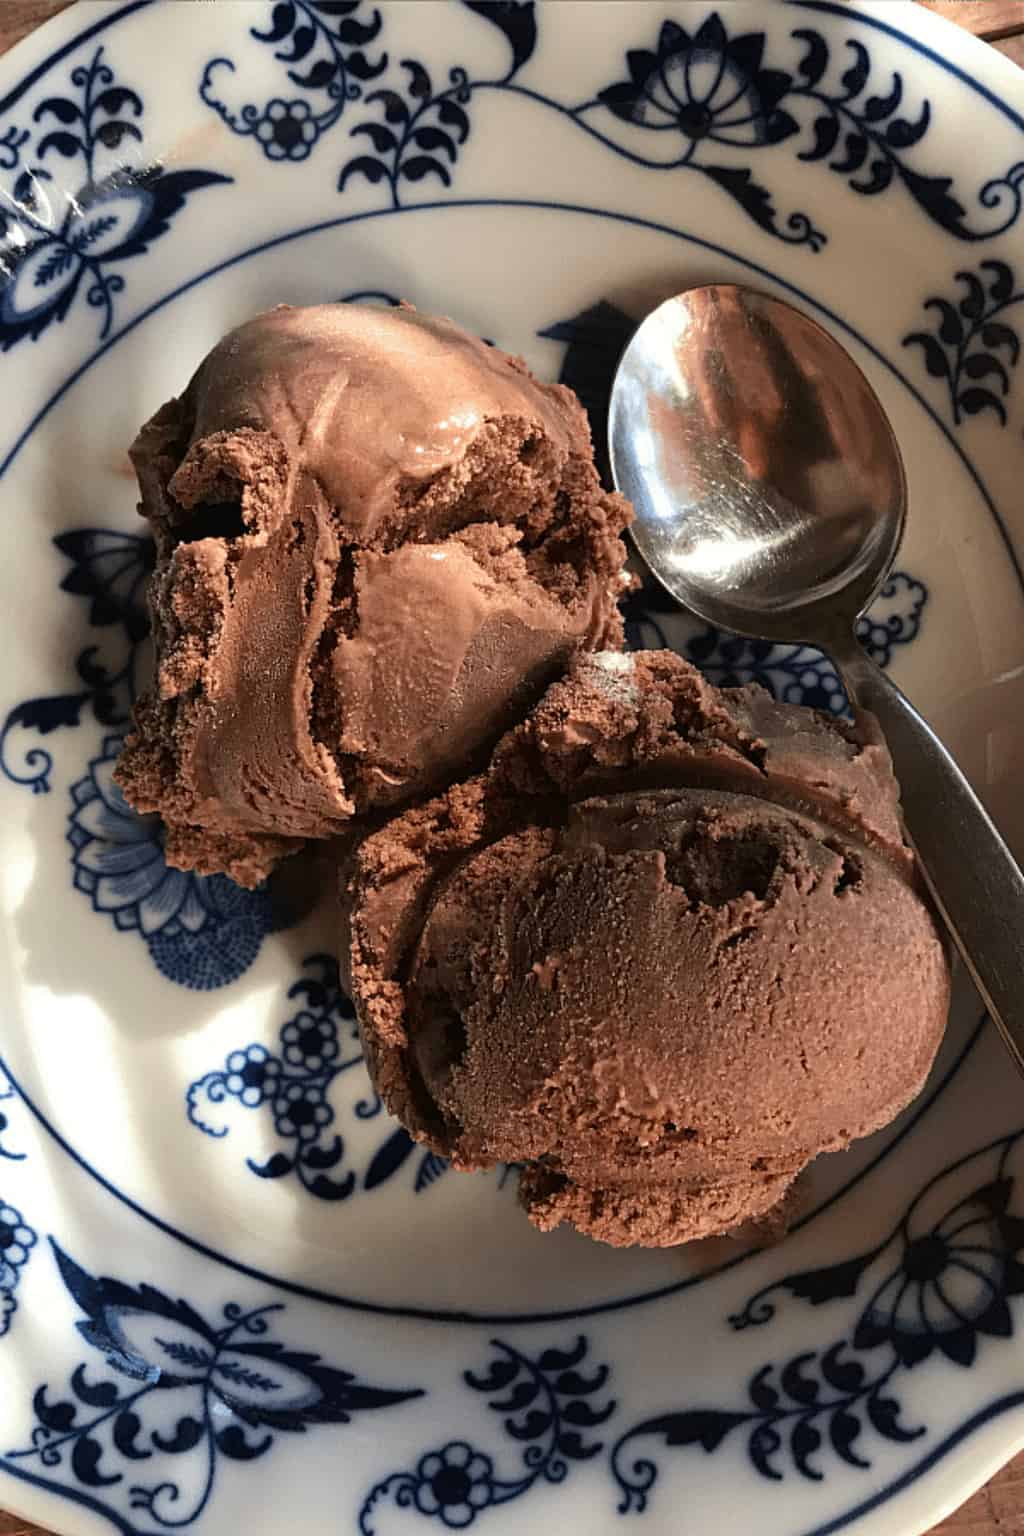 https://reluctantentertainer.com/wp-content/uploads/2017/08/Old-Fashioned-Homemade-Chocolate-Ice-Cream-1.jpg